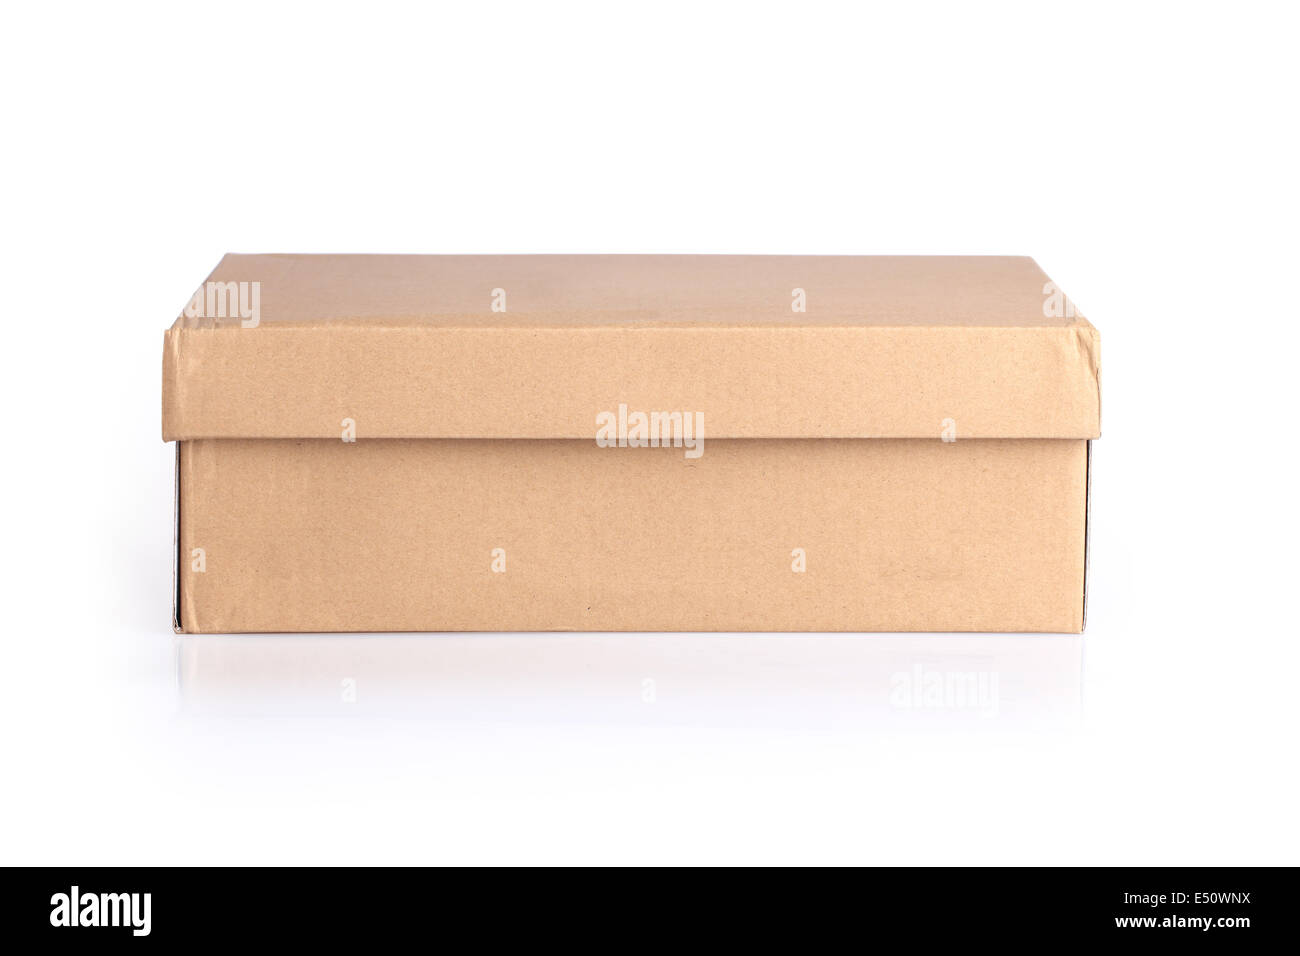 paper packaging box Stock Photo